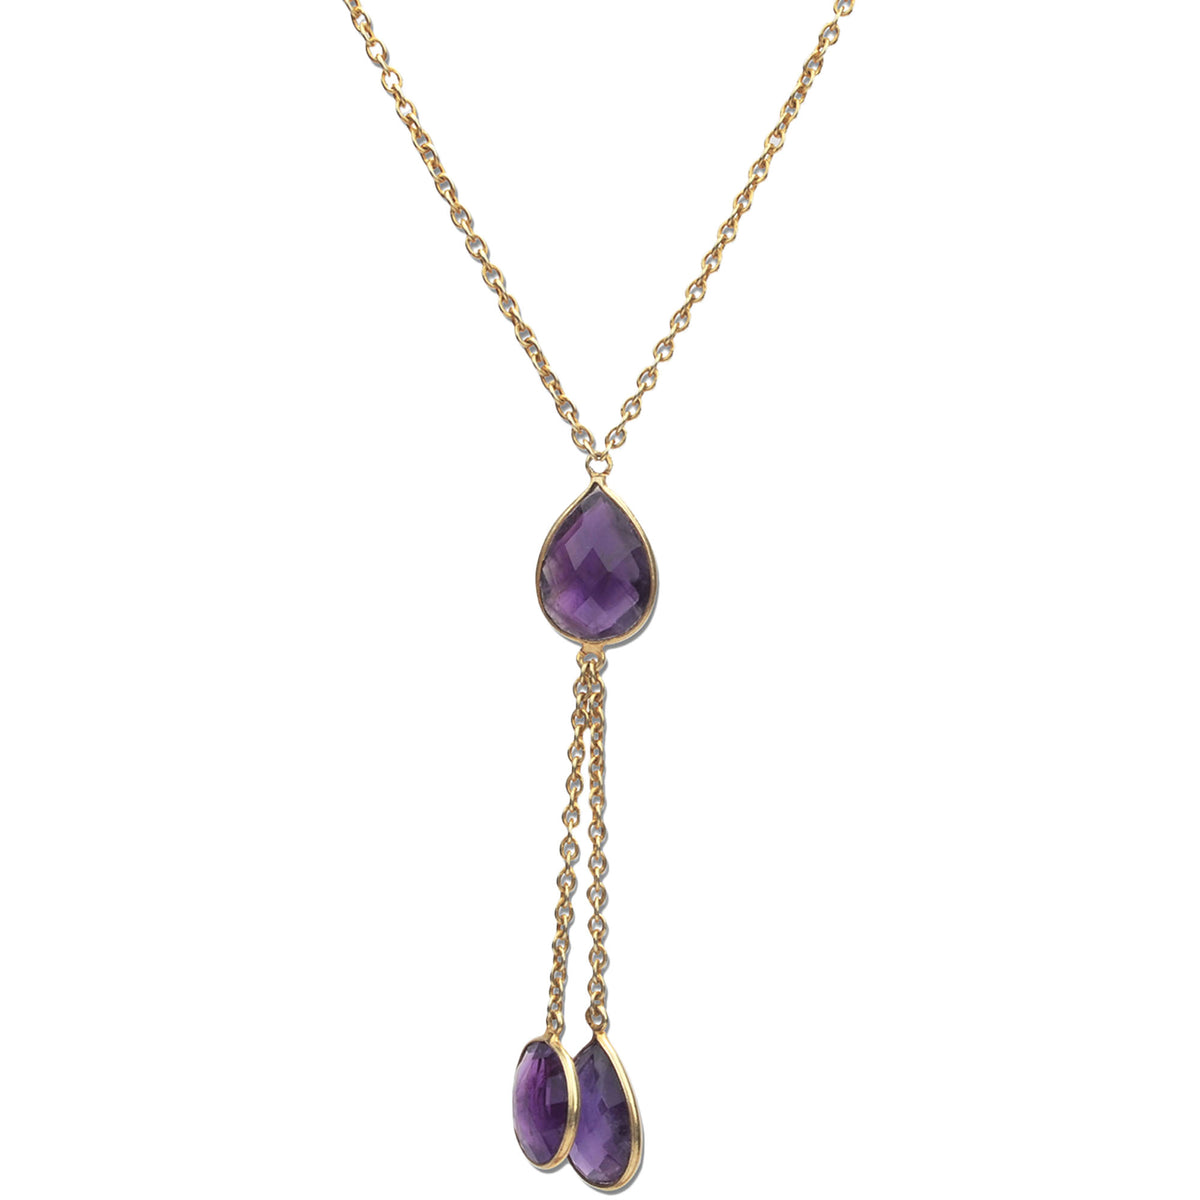 Amethyst necklace in 18 k gold plated silver